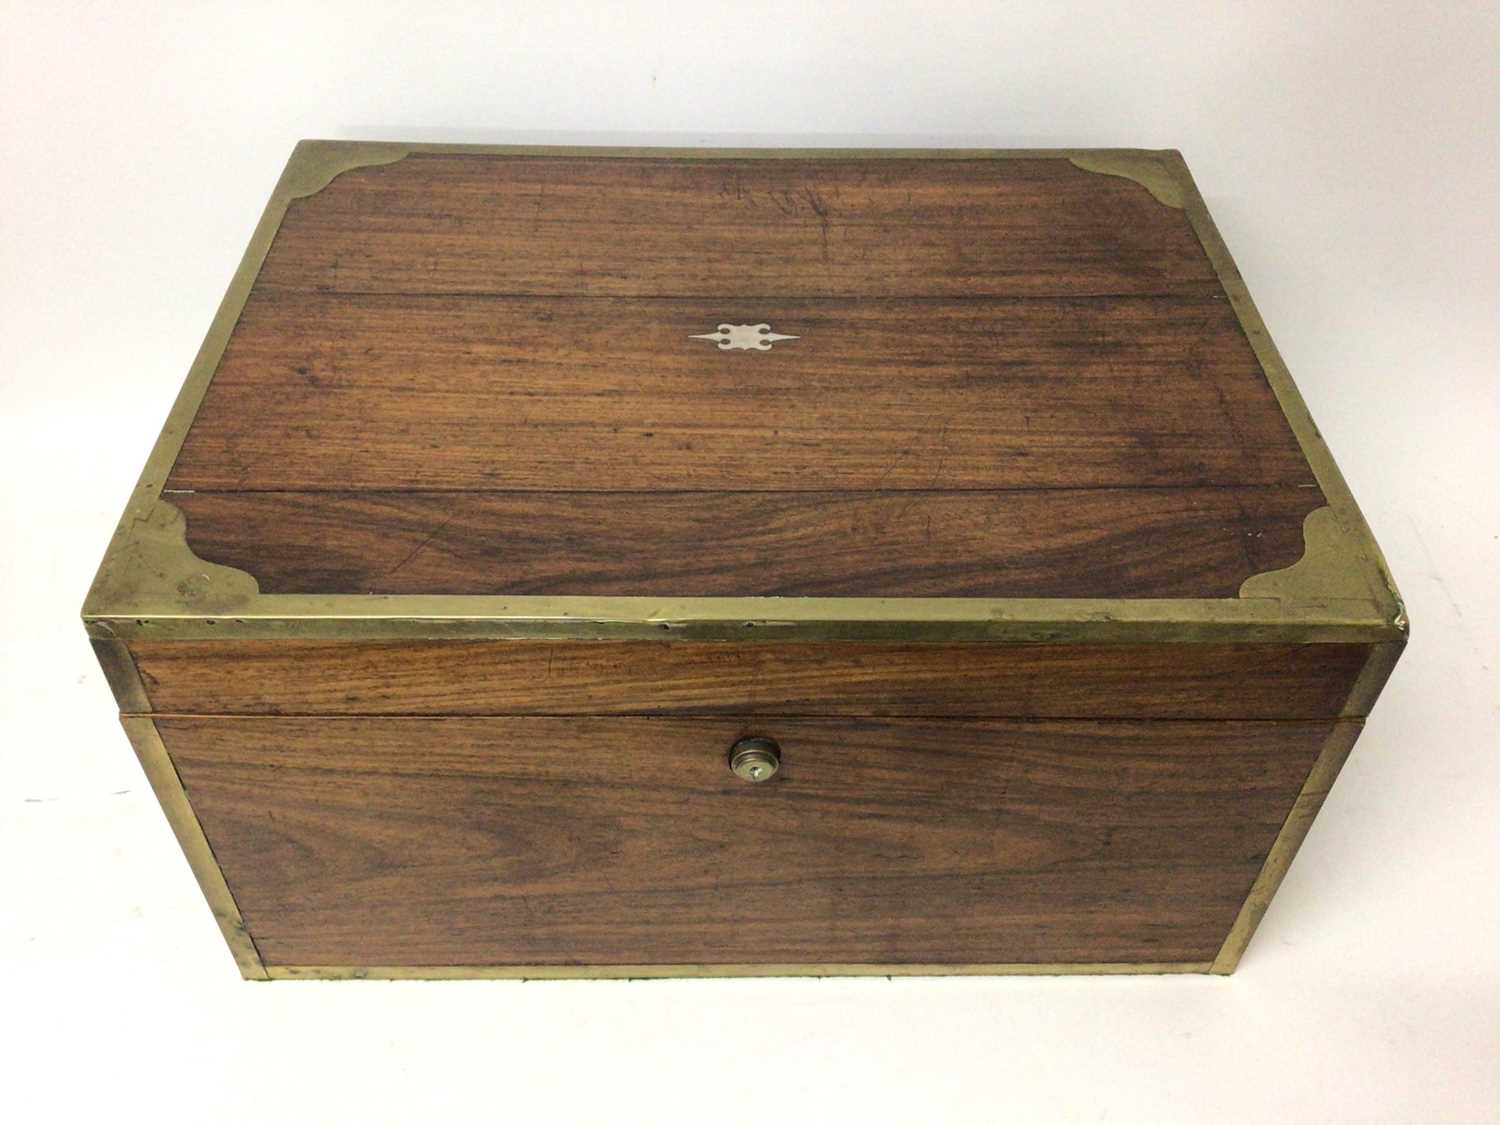 19th century padouk and brass bound campaign box